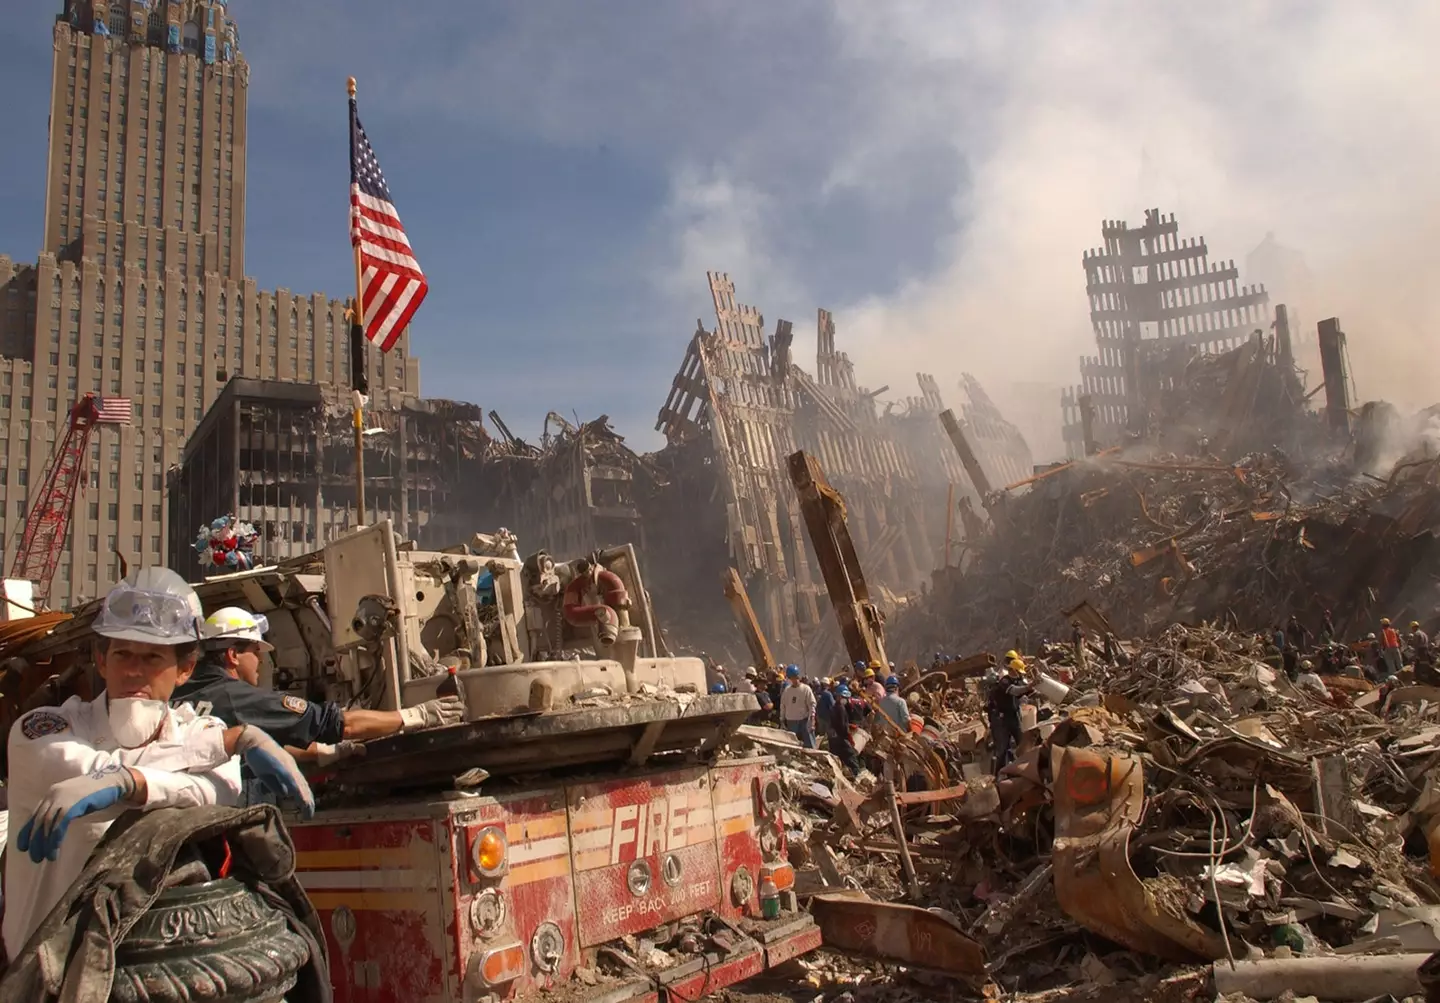 The 9/11 attacks were 21 years ago today.